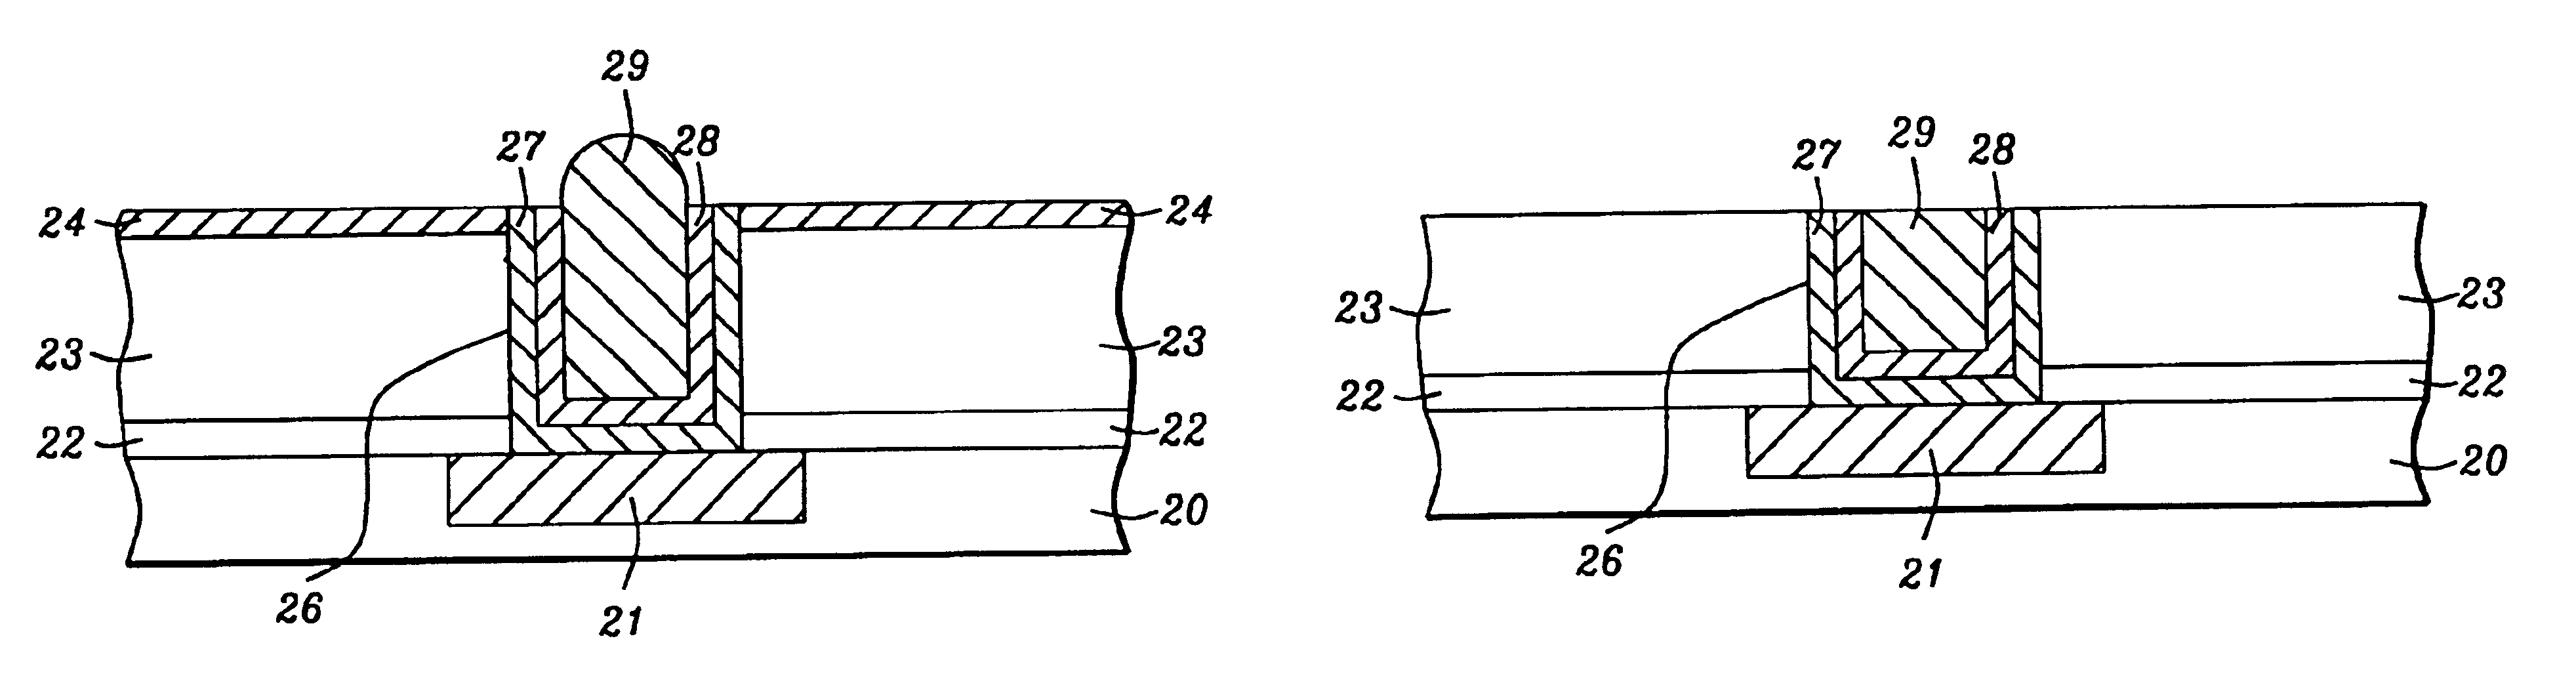 Method of selectively making copper using plating technology